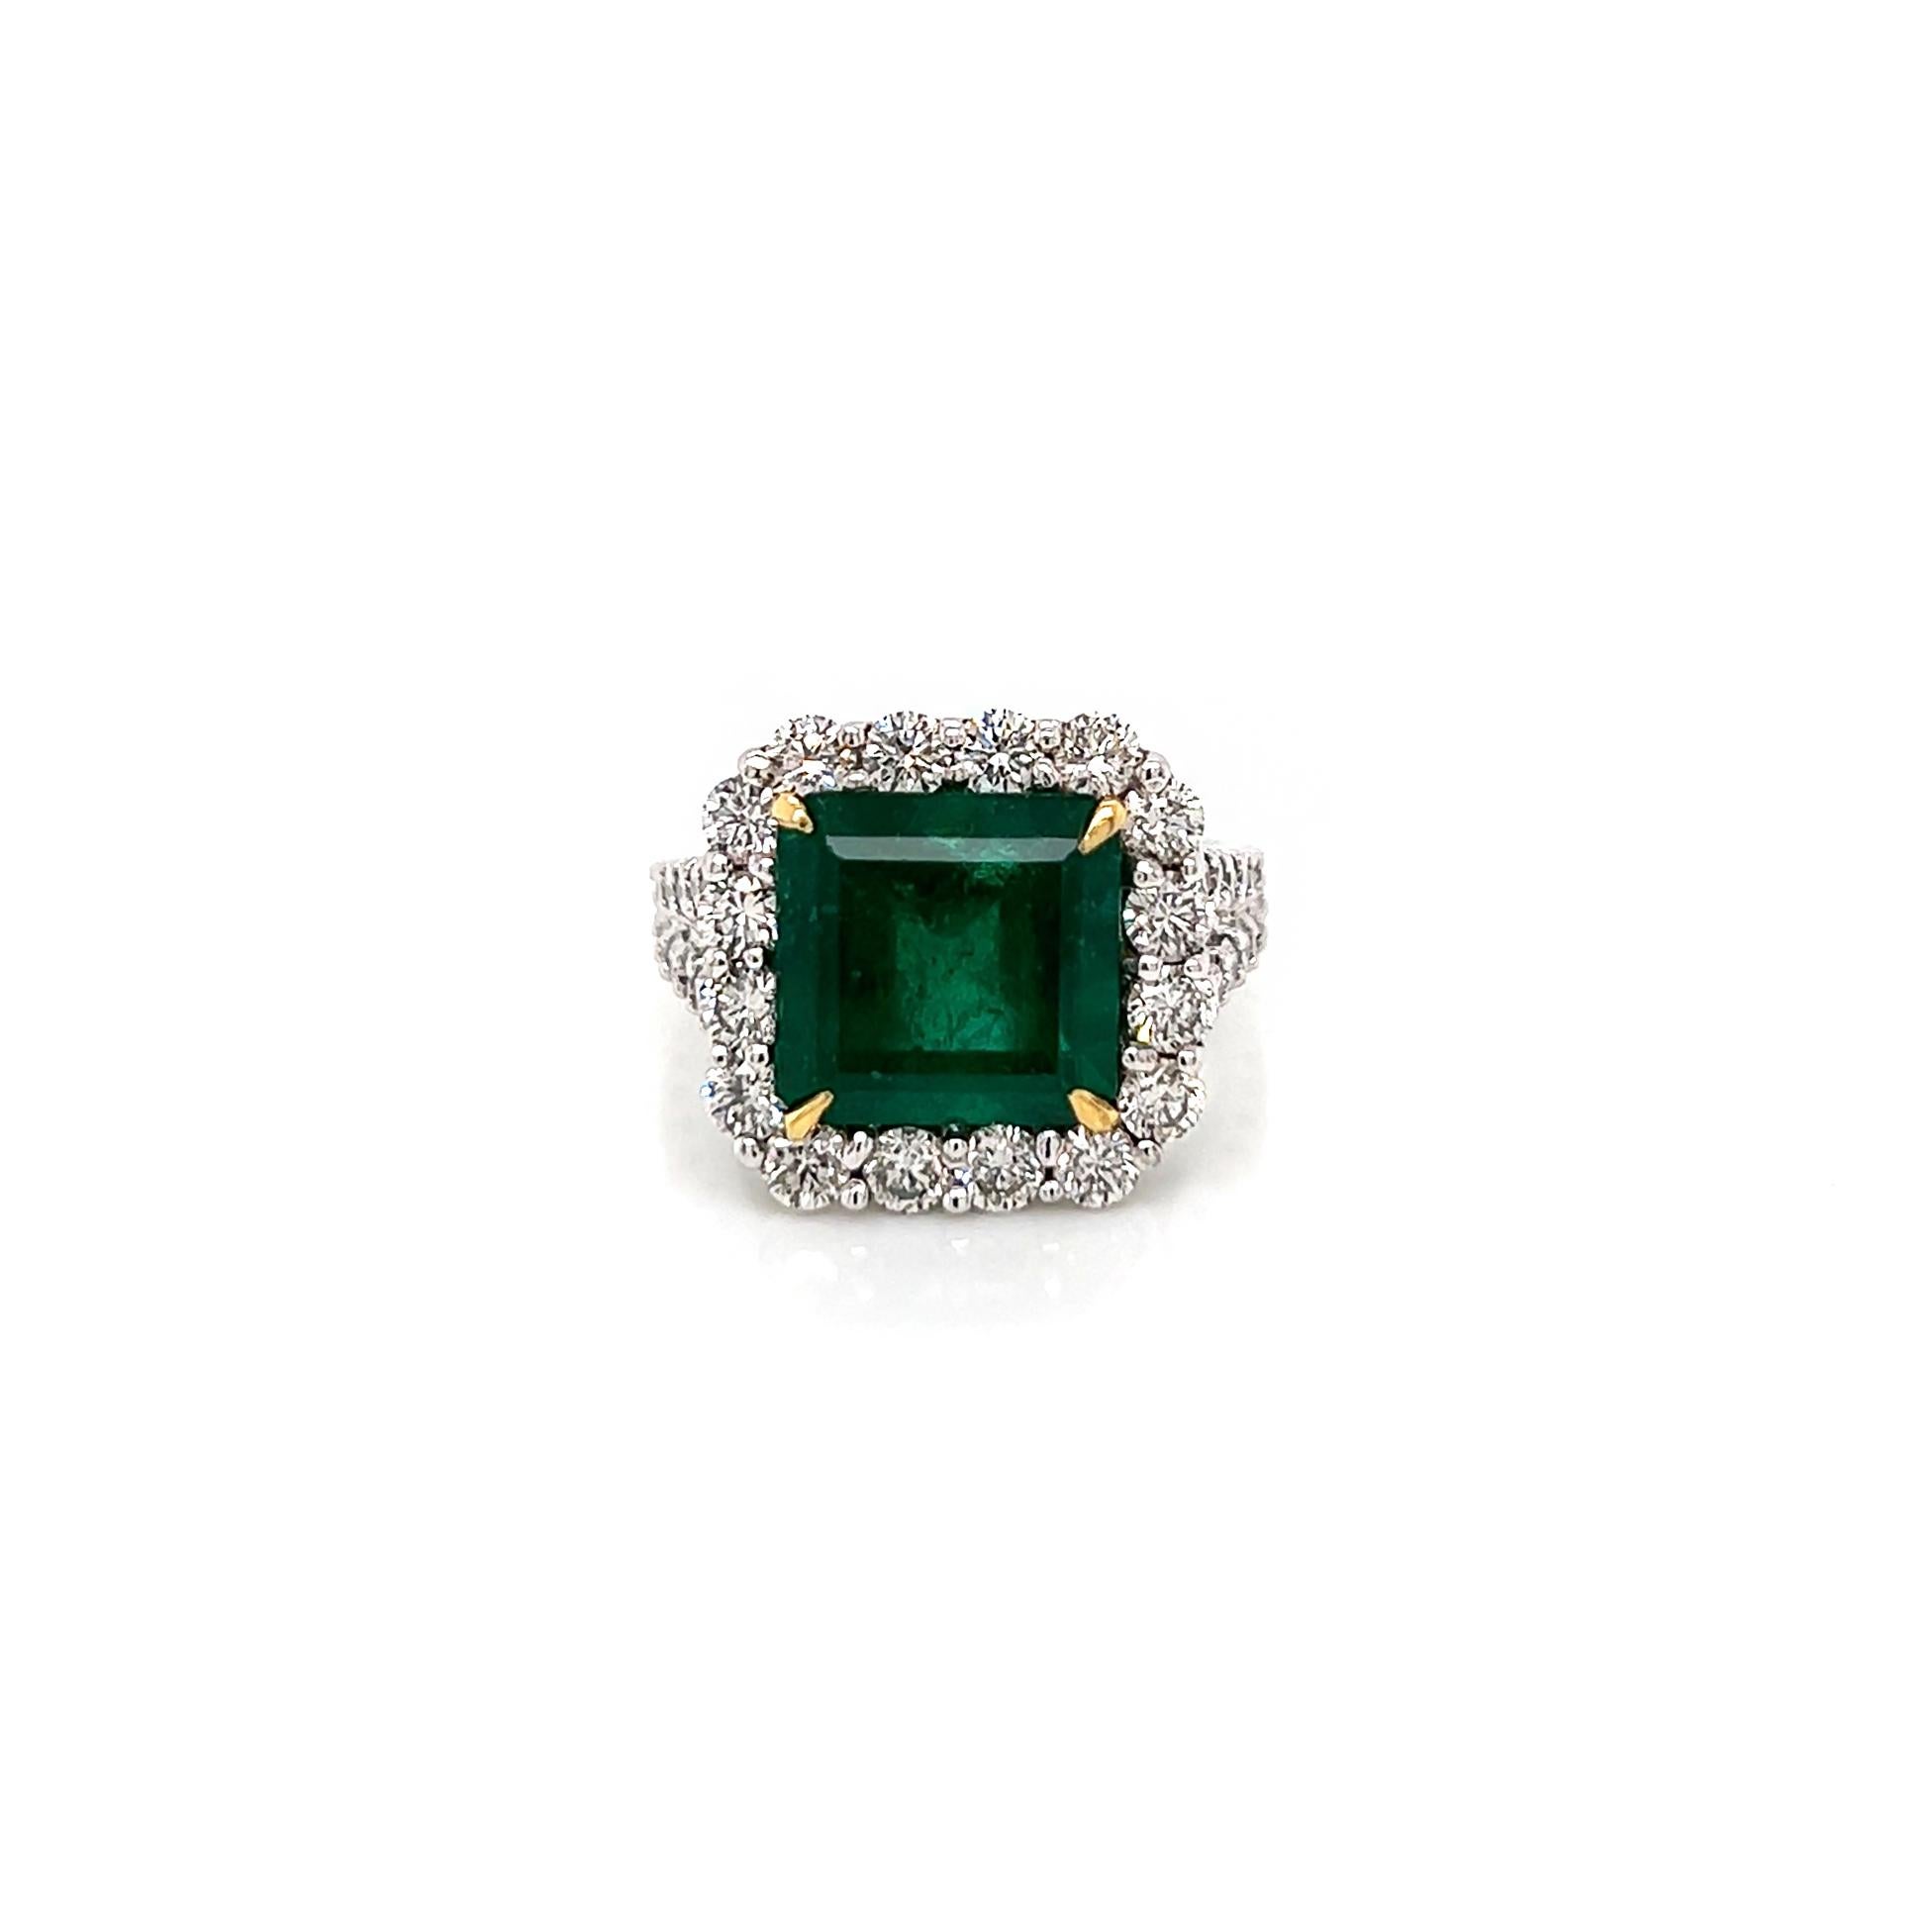 5.95 Total Carat Green Emerald and Diamond Ladies Ring

-Metal Type: Platinum
-4.15 Carat Radiant Cut Green Emerald
-1.80 Carat Round Natural Diamonds, F-G Color, VS-SI Clarity
-Size 6.25

Made in New York City.